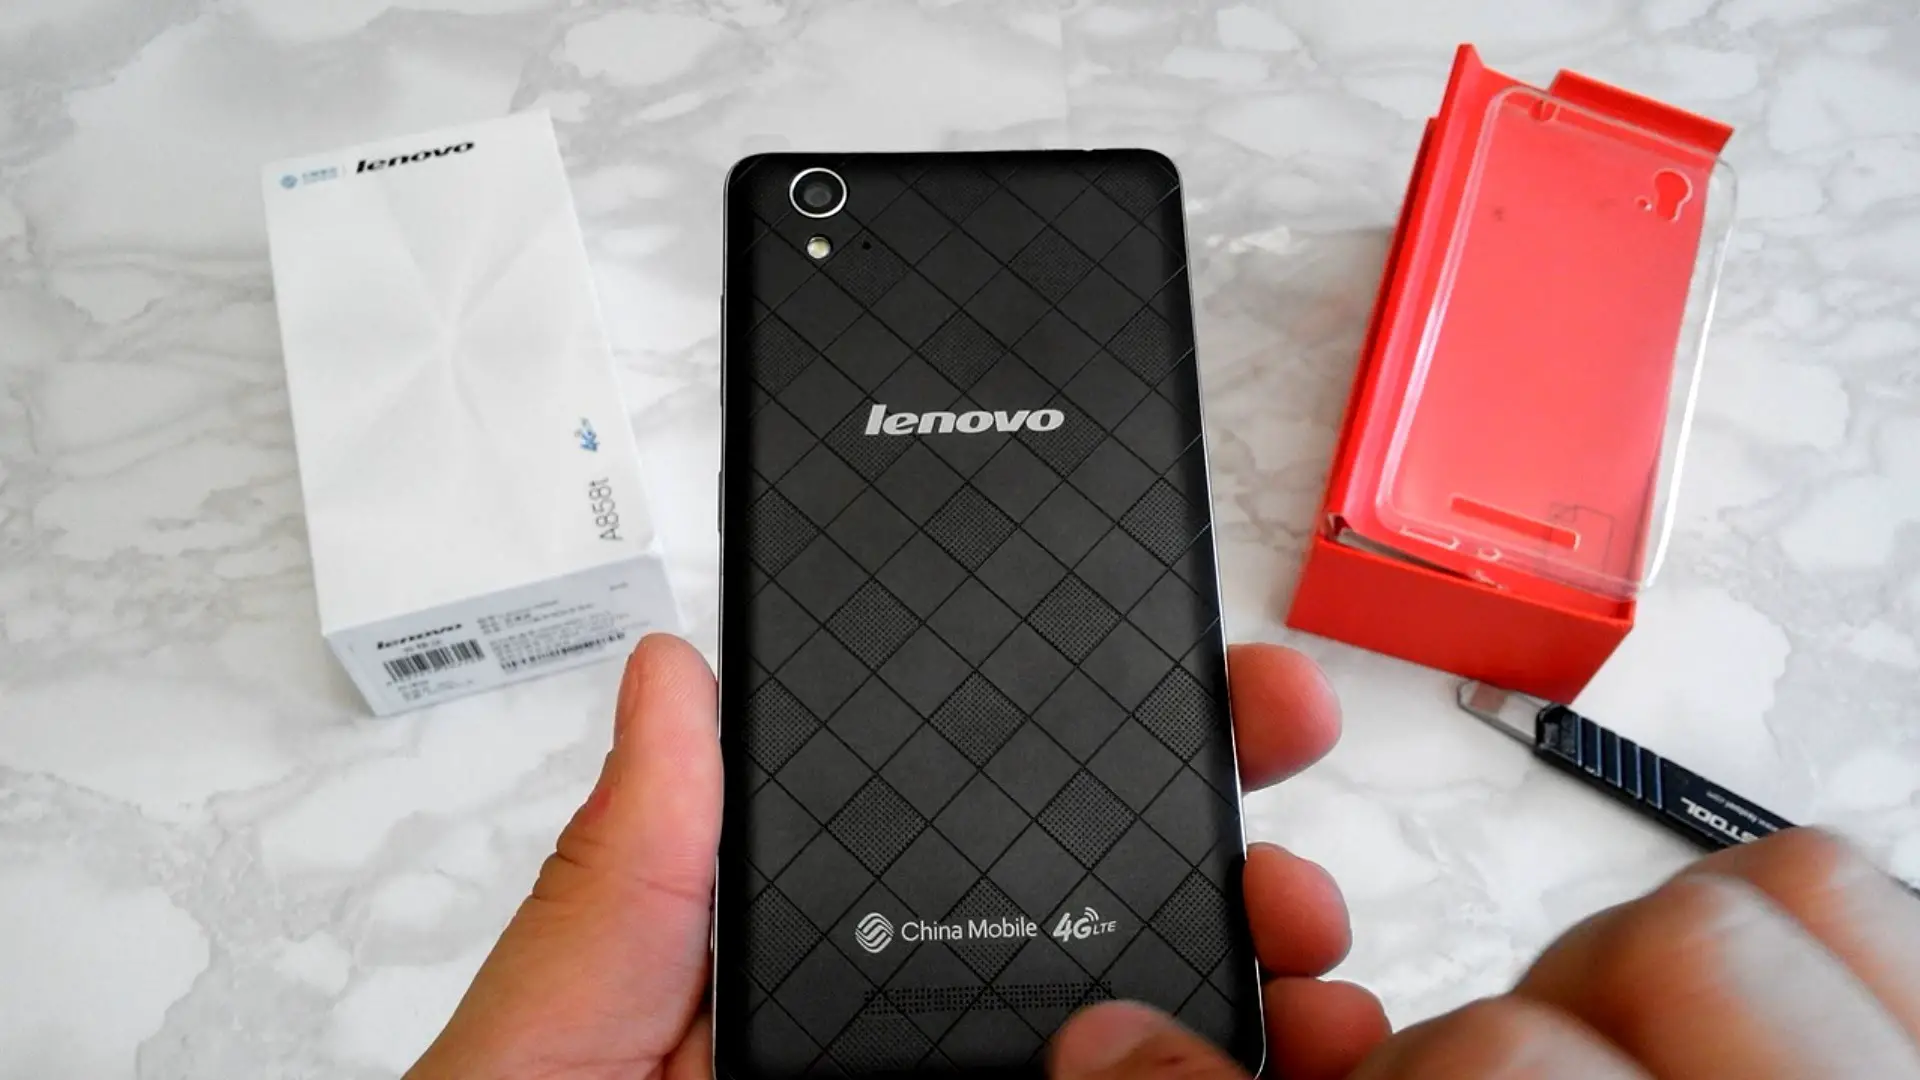 How to Flash Stock Rom on Lenovo A858T MT6752 S233